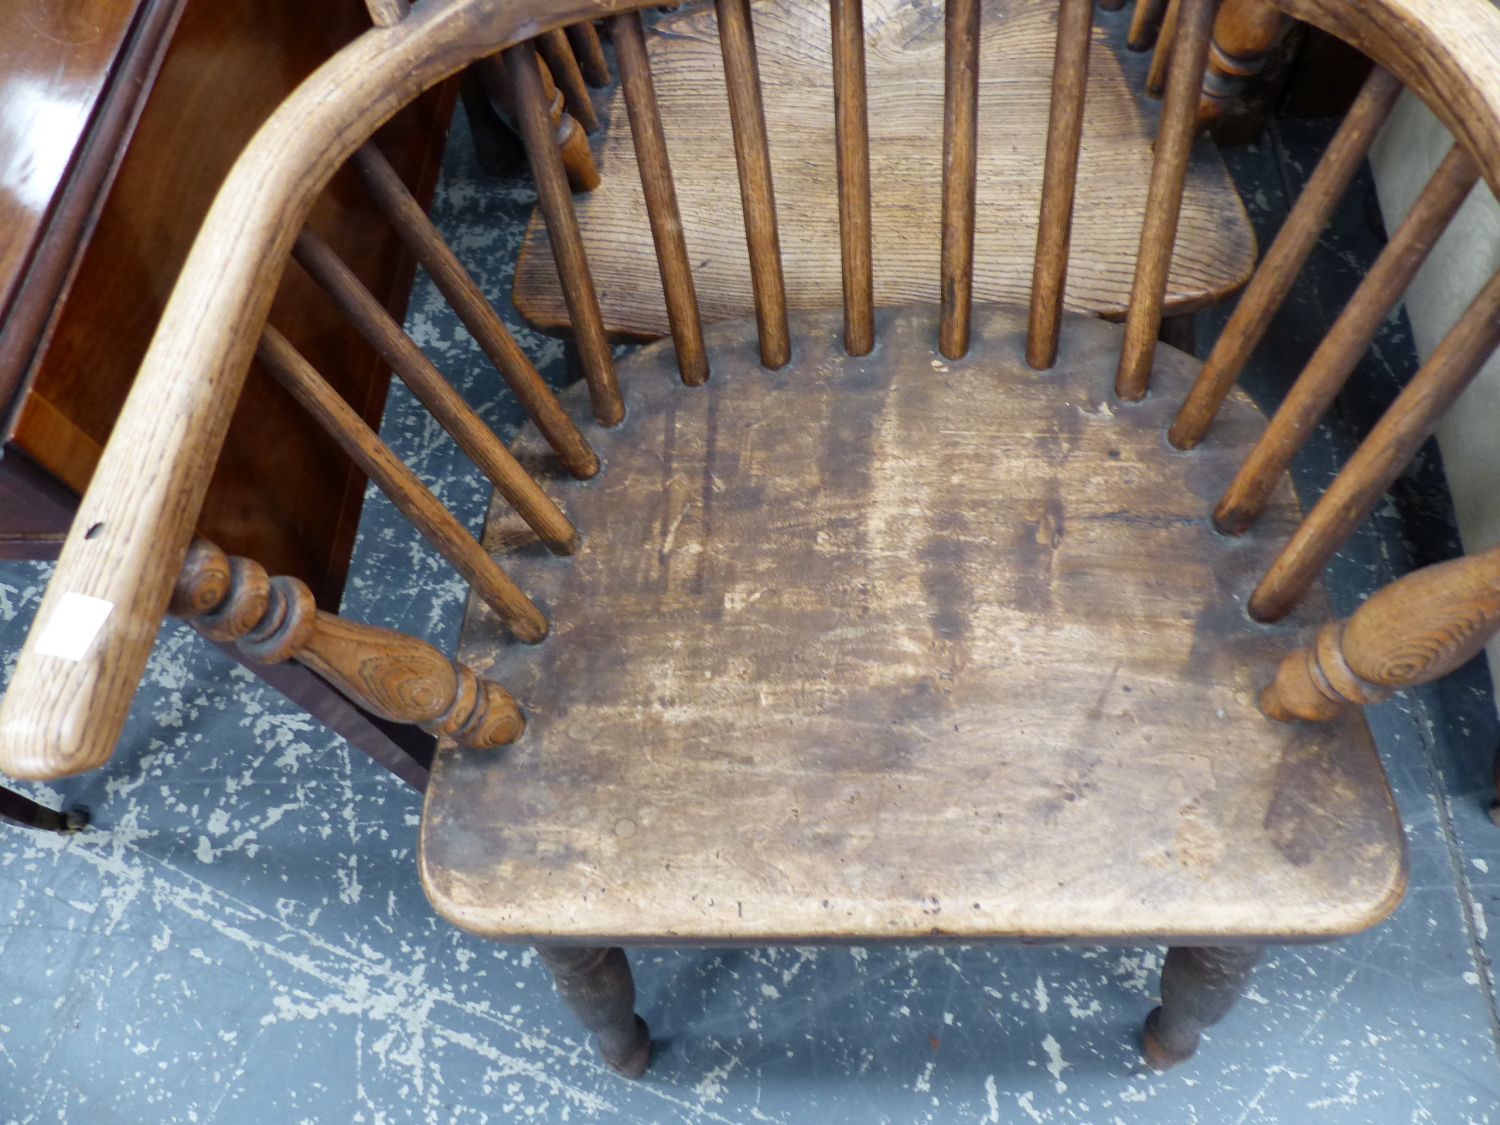 TWO OAK AND ELM WINDSOR CHAIRS WITH ROUND ARCH HOOPS SUPPORTING THE STICK BACKS AND FORMING THE ARMS - Image 3 of 8